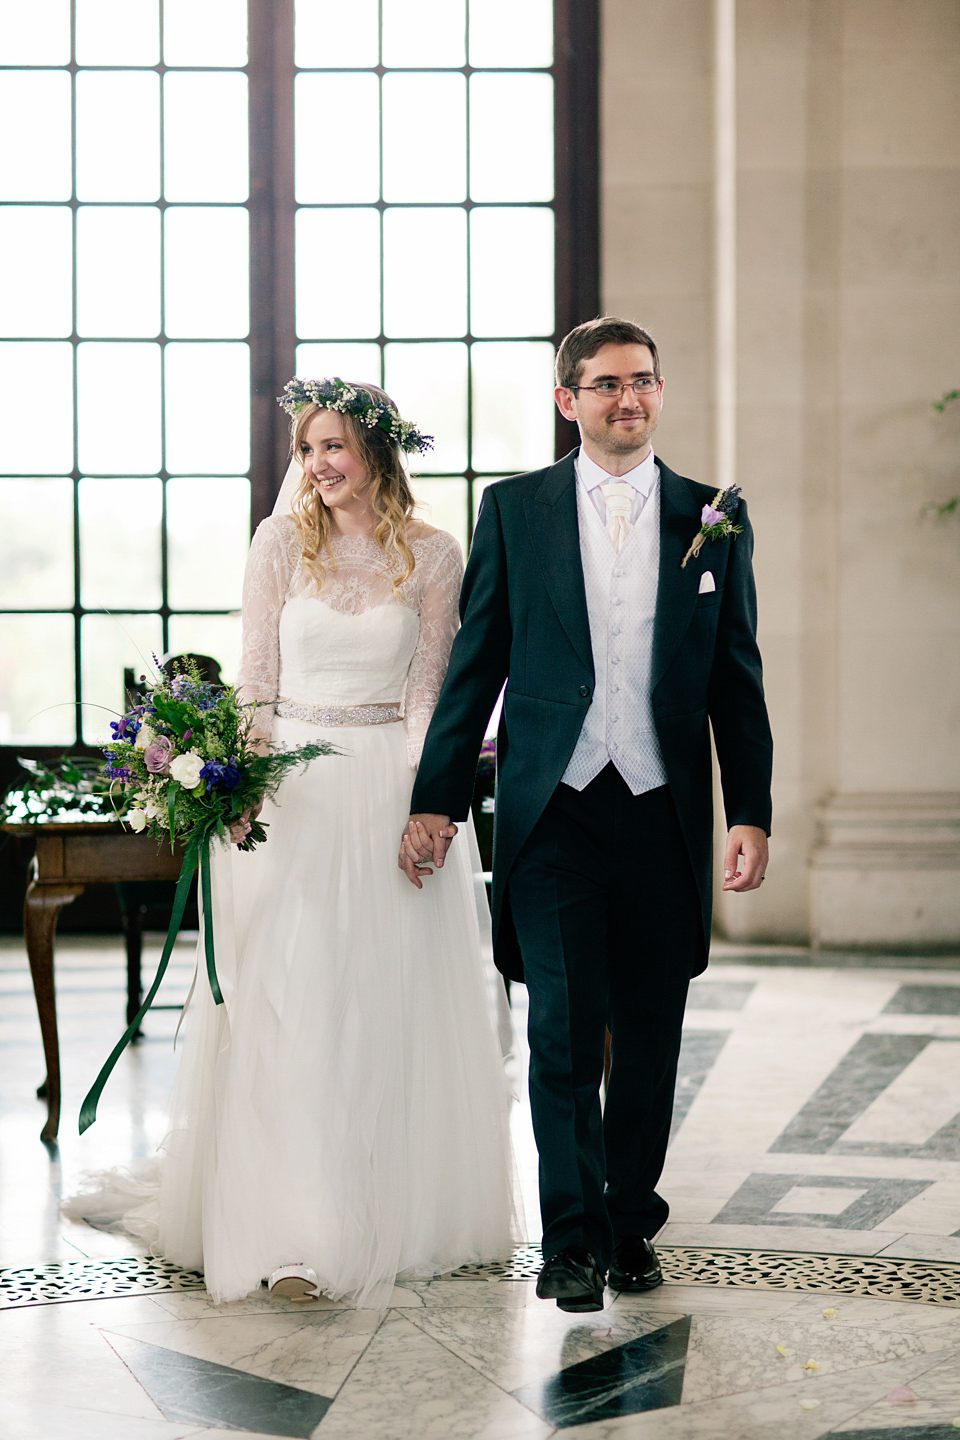 A Watters Wedding Dress for a Lavender and Lemons Inspired Wedding. Photography by Jo Bradbury.